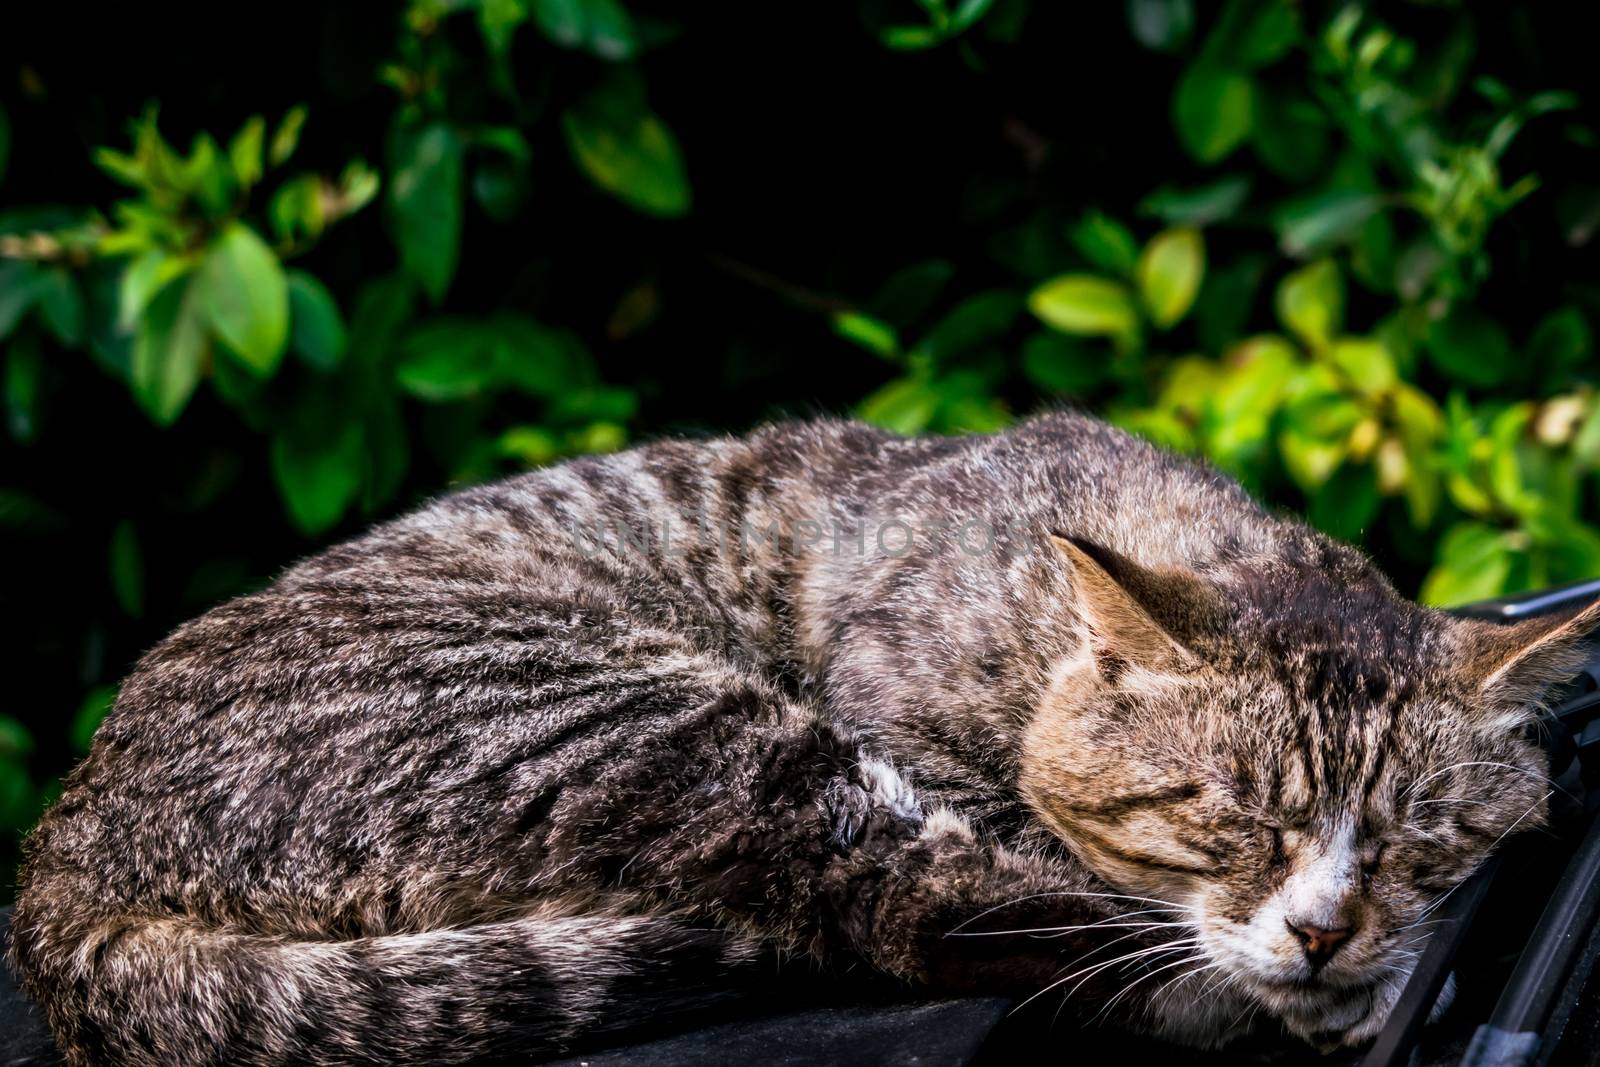 A sweet dream of lazy brown cat